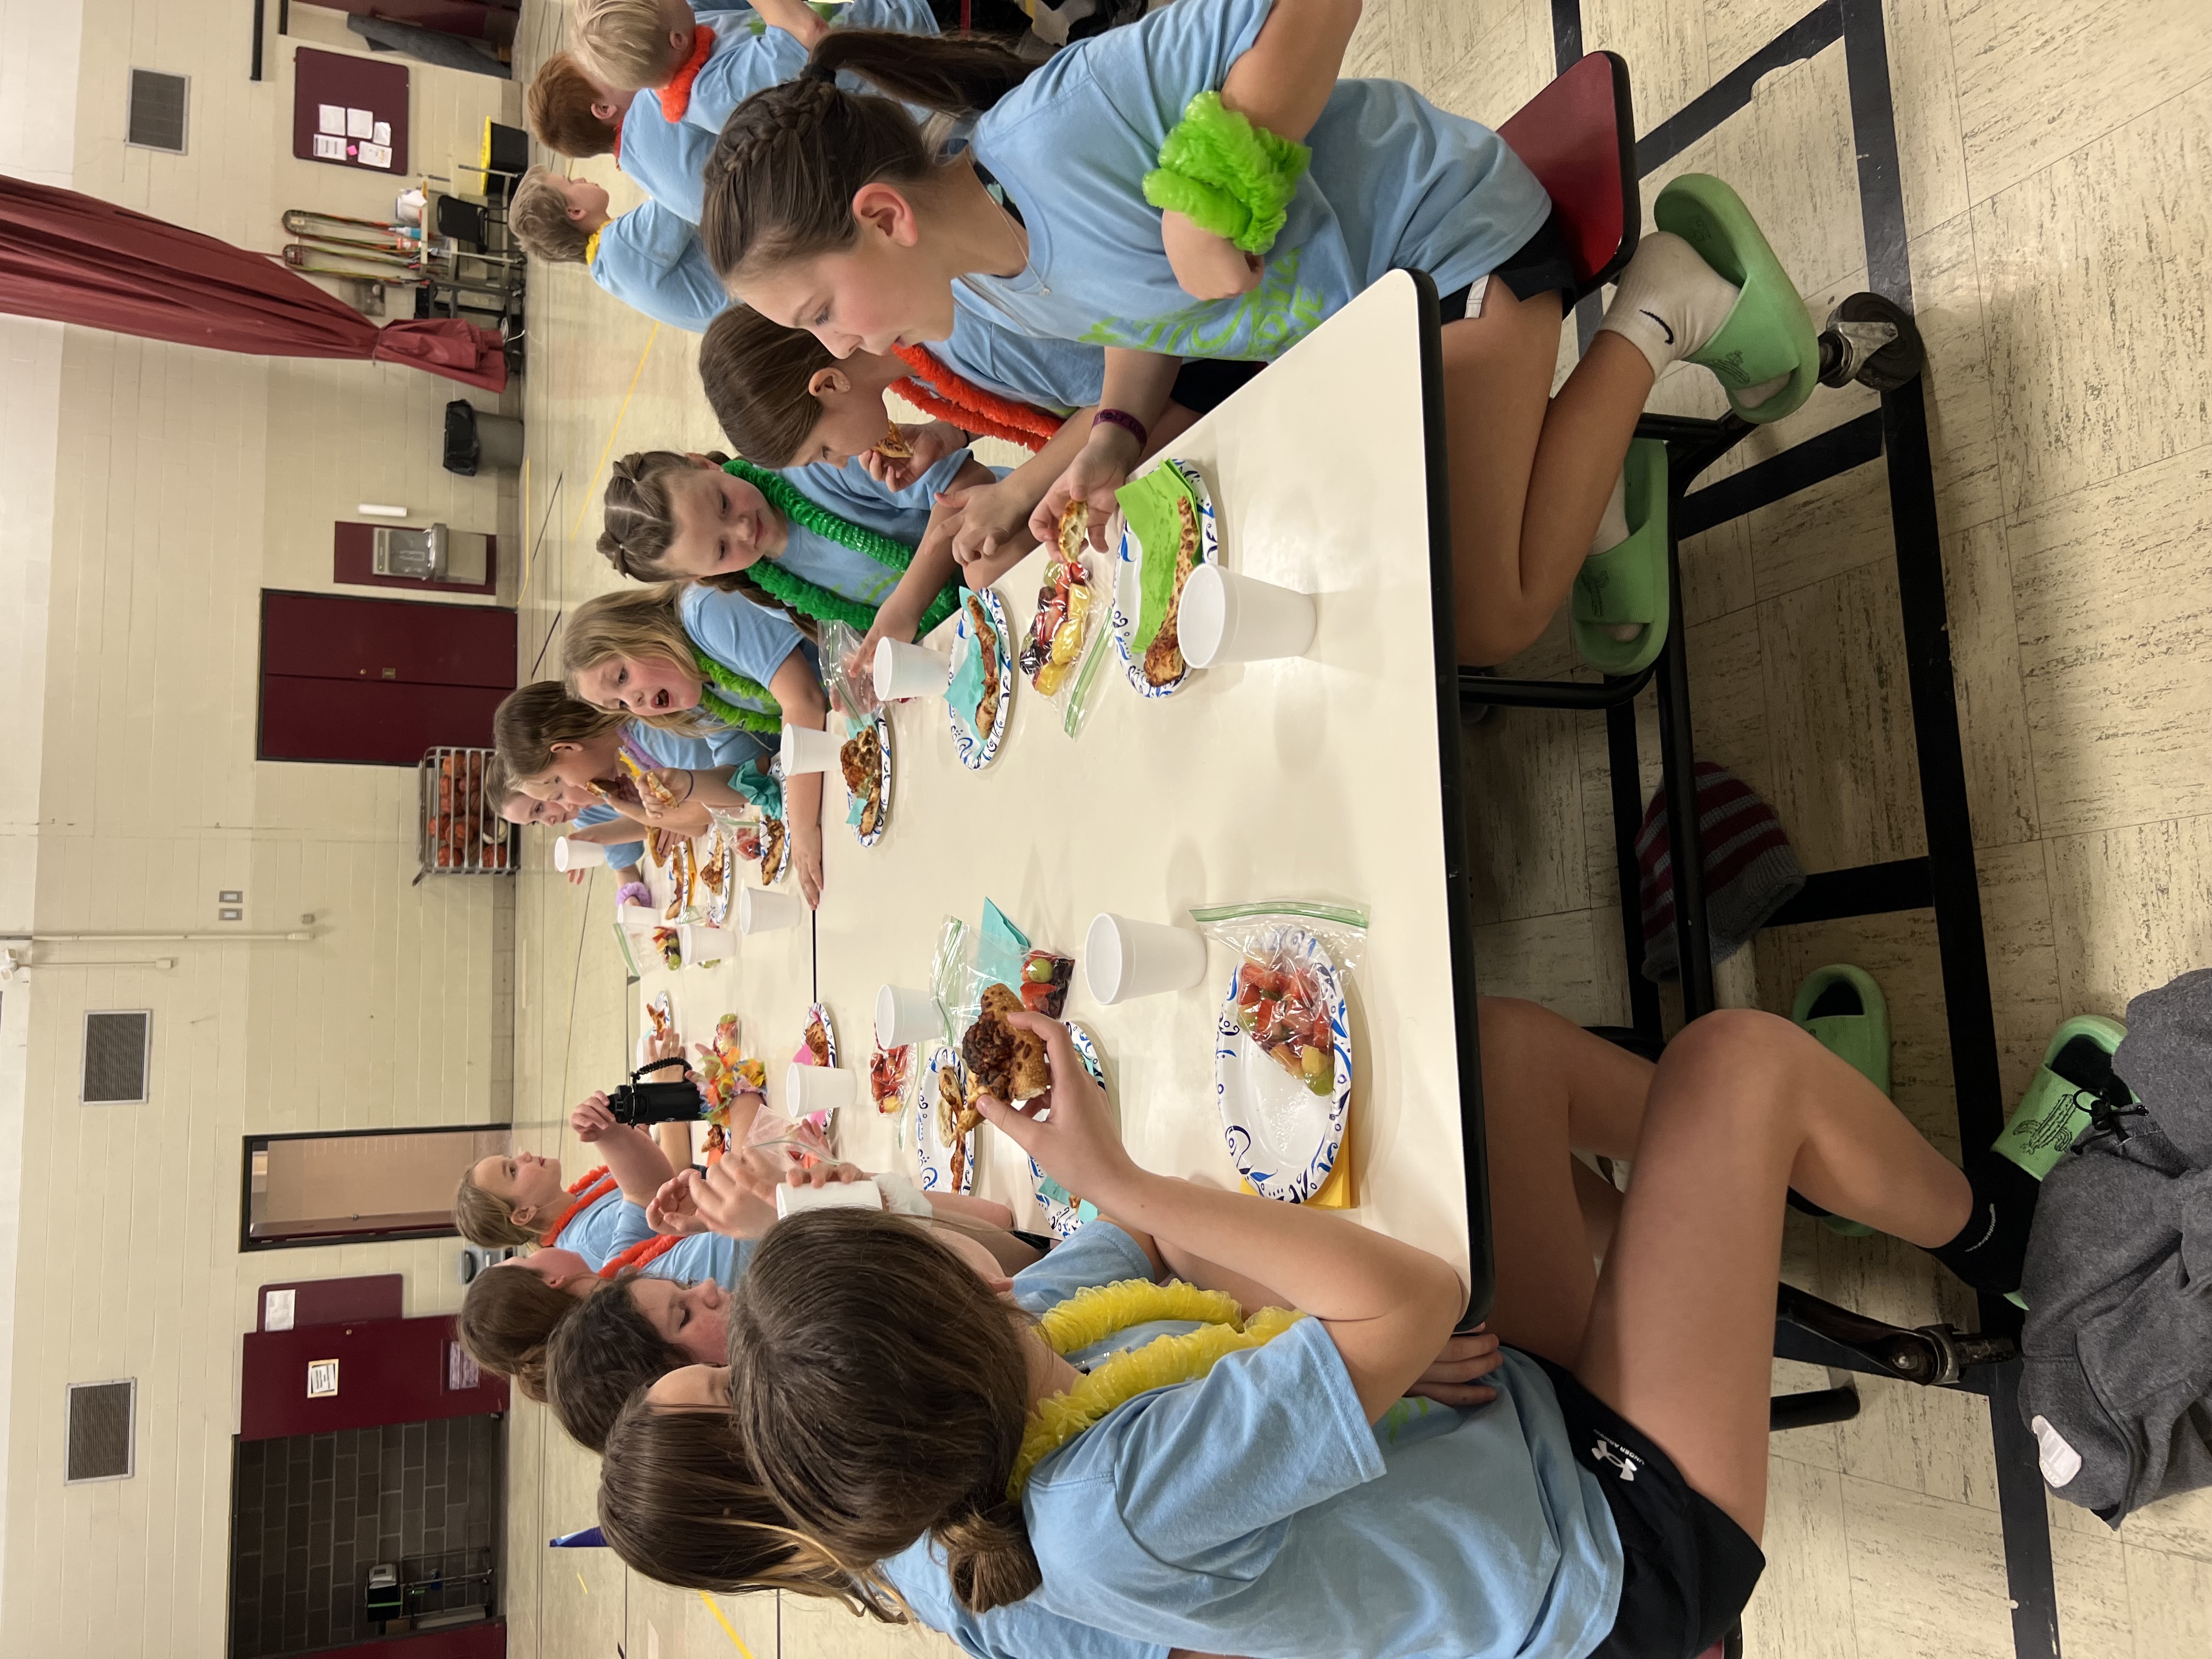 Students enjoying some pizza and fruit for a late night snack